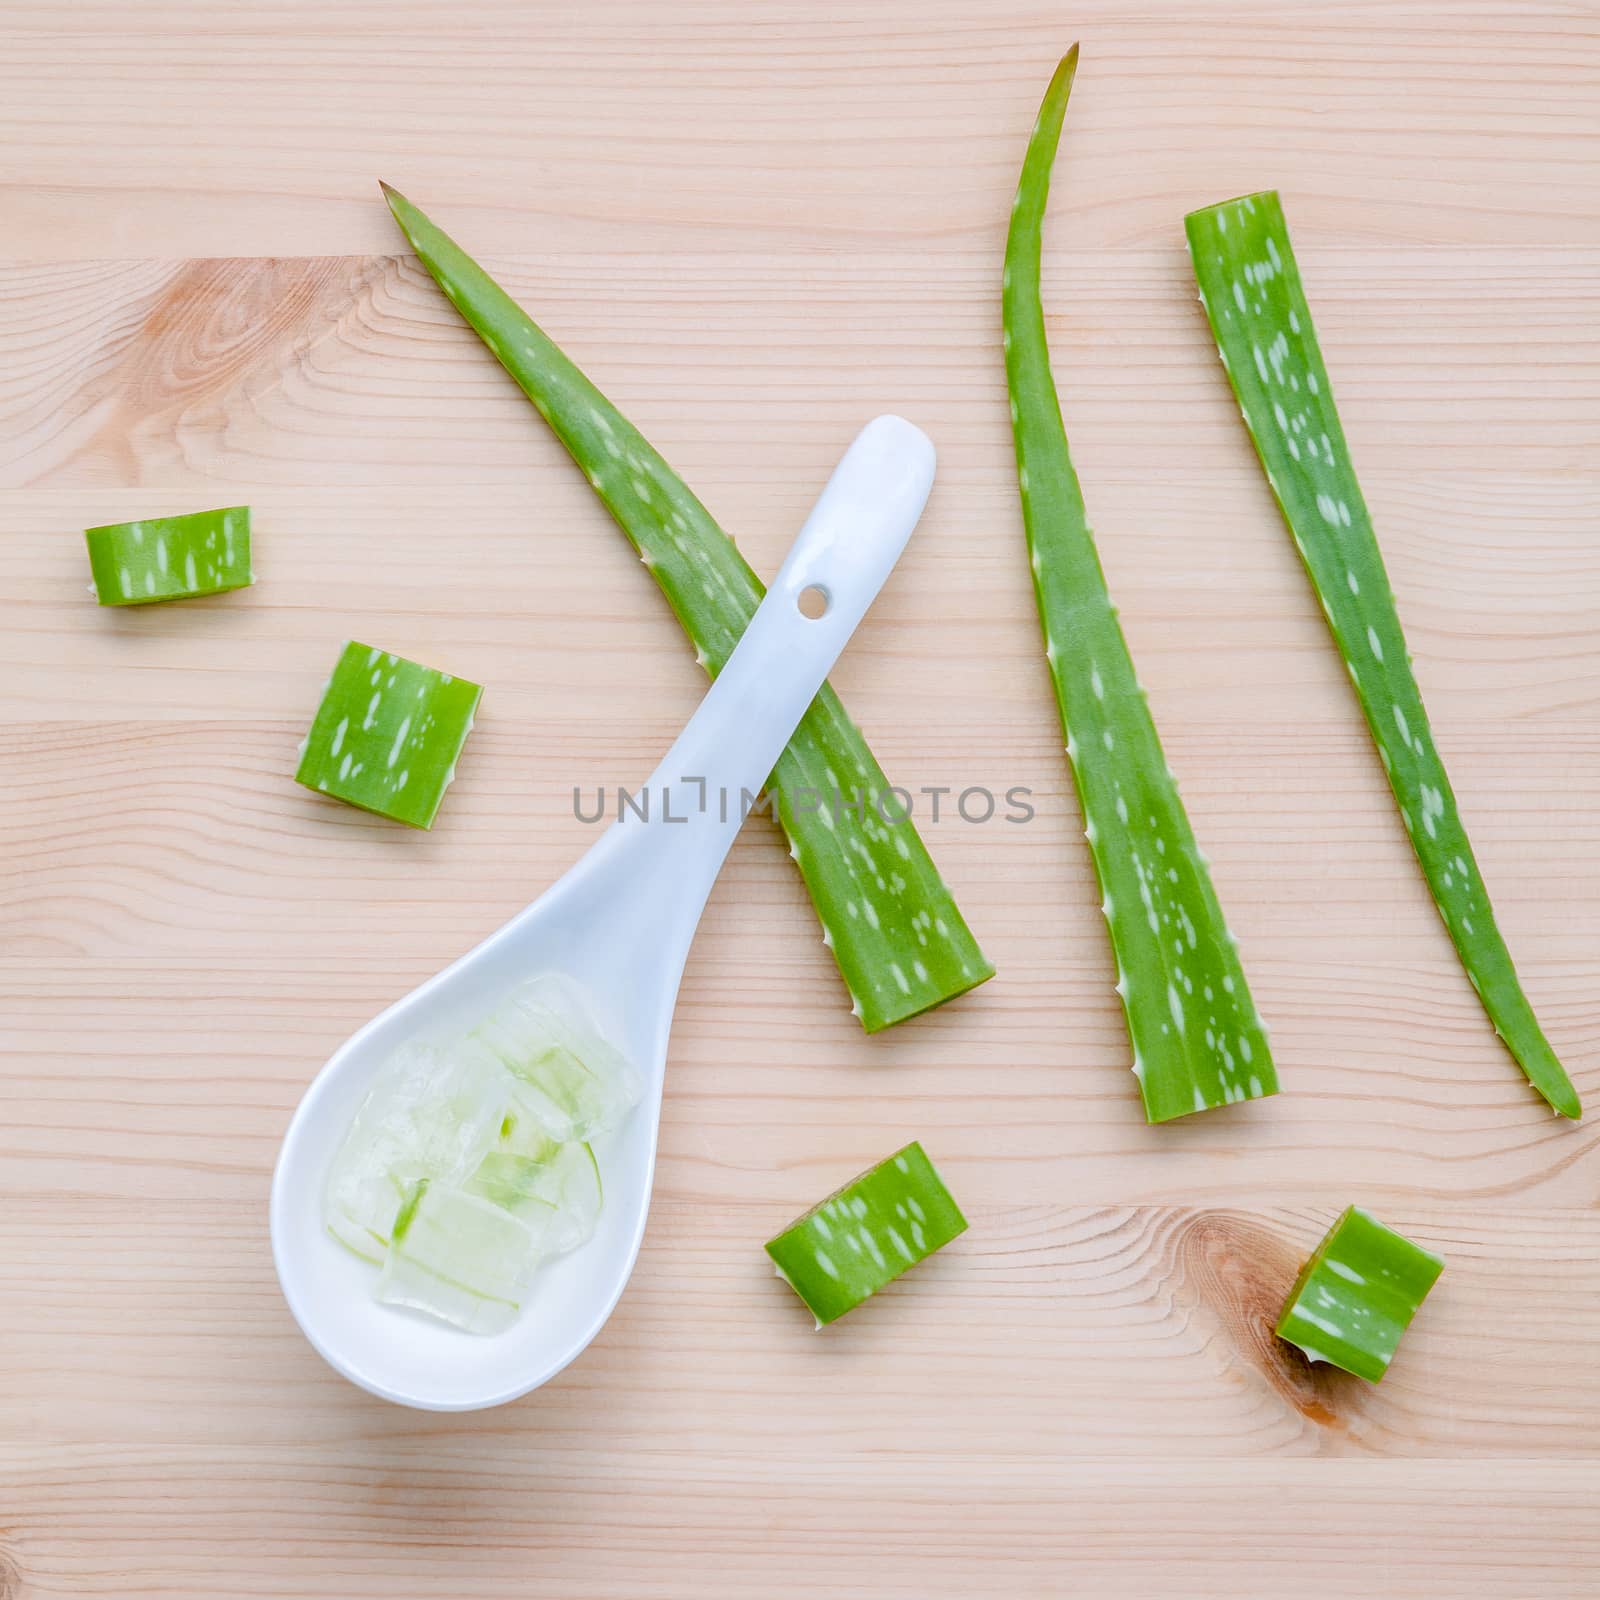 Alternative skin care  aloe vera gel in wooden spoons with aloe vera leaves set up on wooden table.